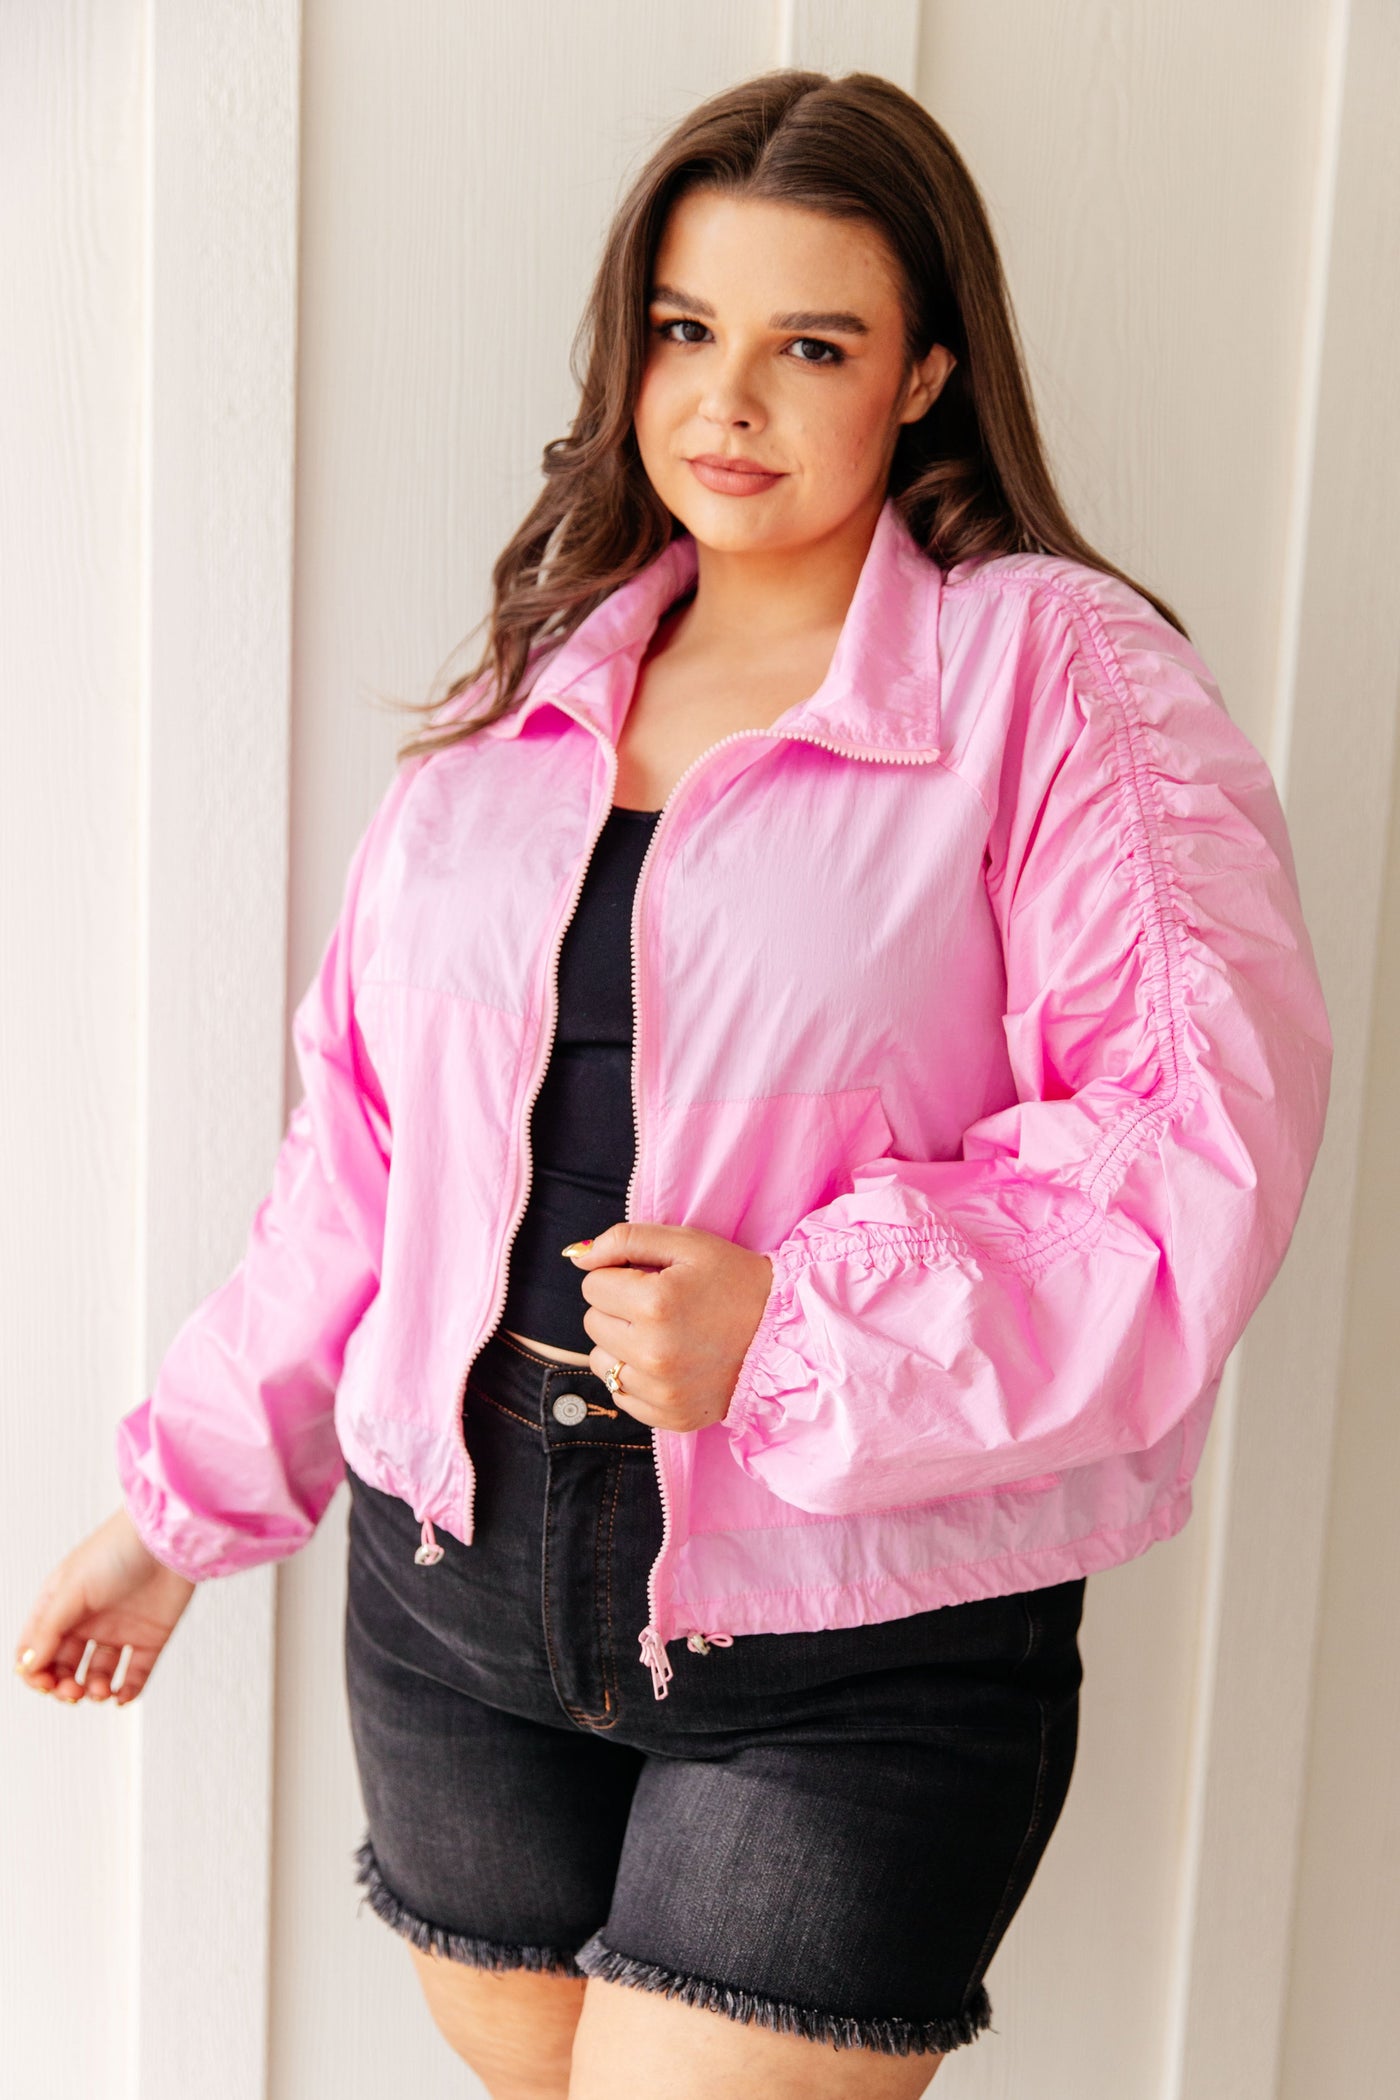 Weak in the Knees Windbreaker-Layers-Ave Shops-Market Street Nest, Fashionable Clothing, Shoes and Home Décor Located in Mabank, TX